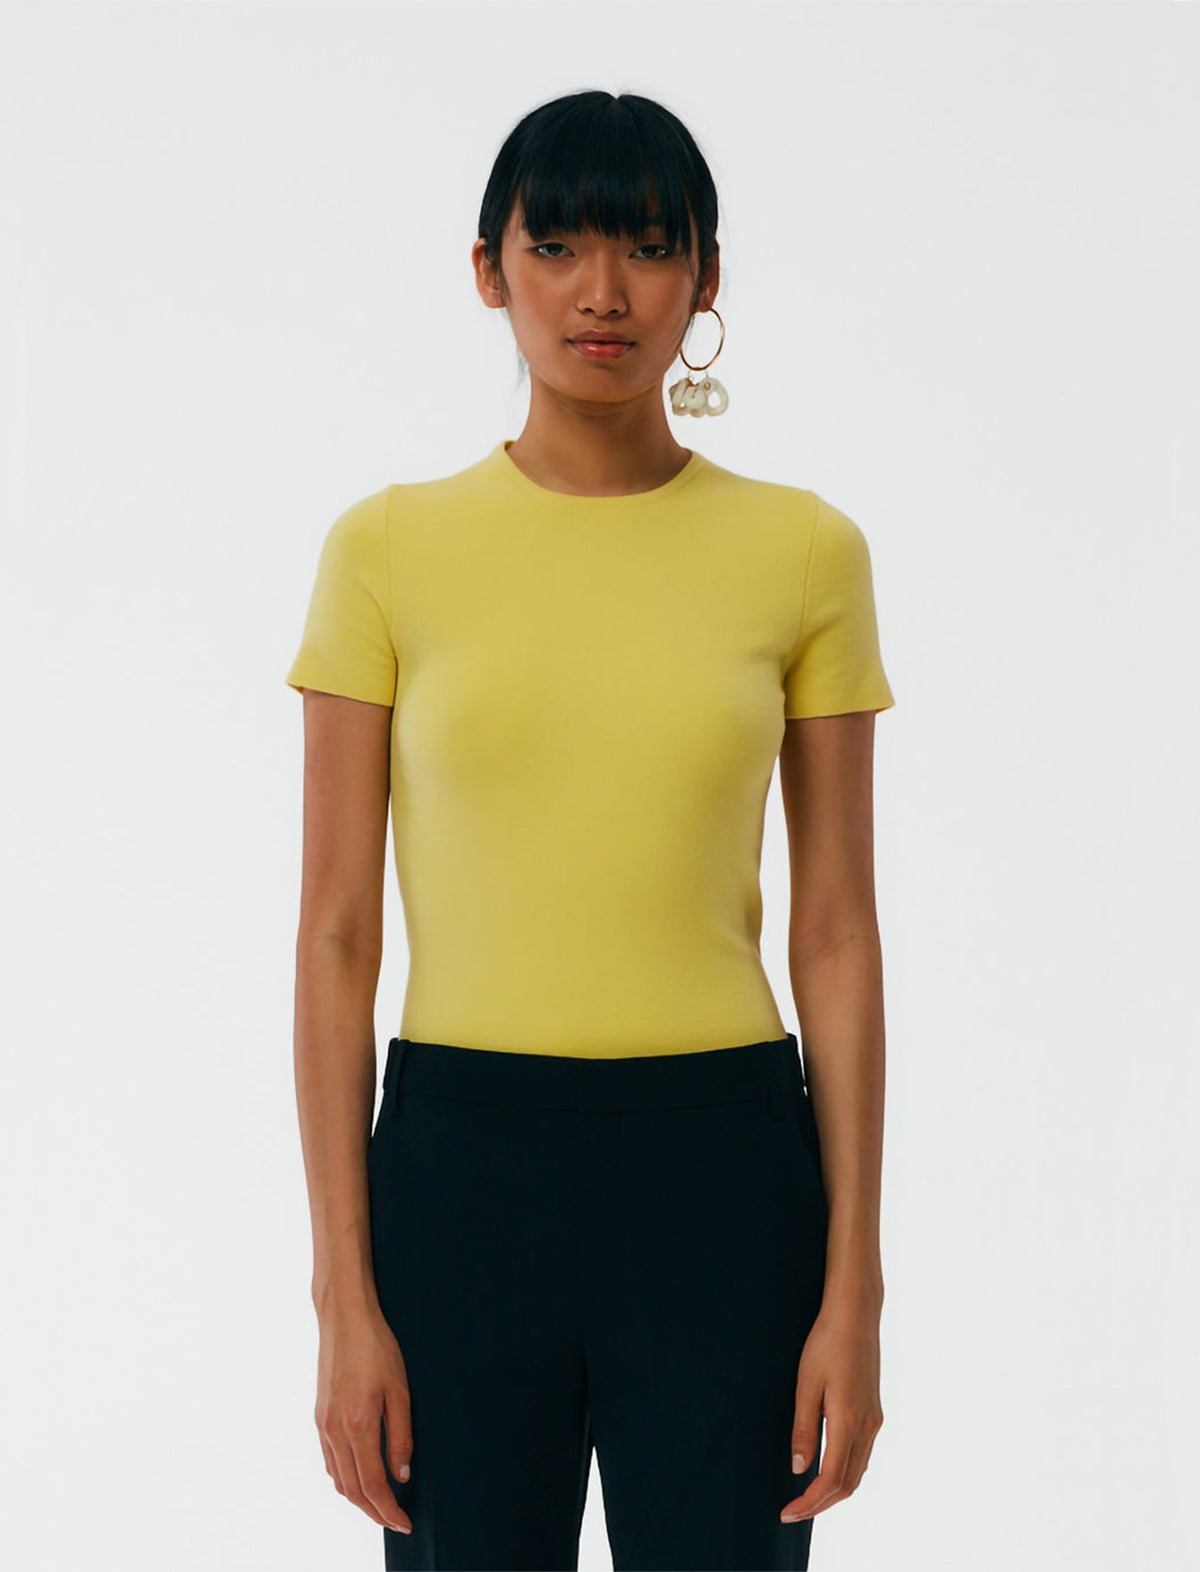 TIBI Compact Stretch Cashmere T-Shirt in Canary Yellow